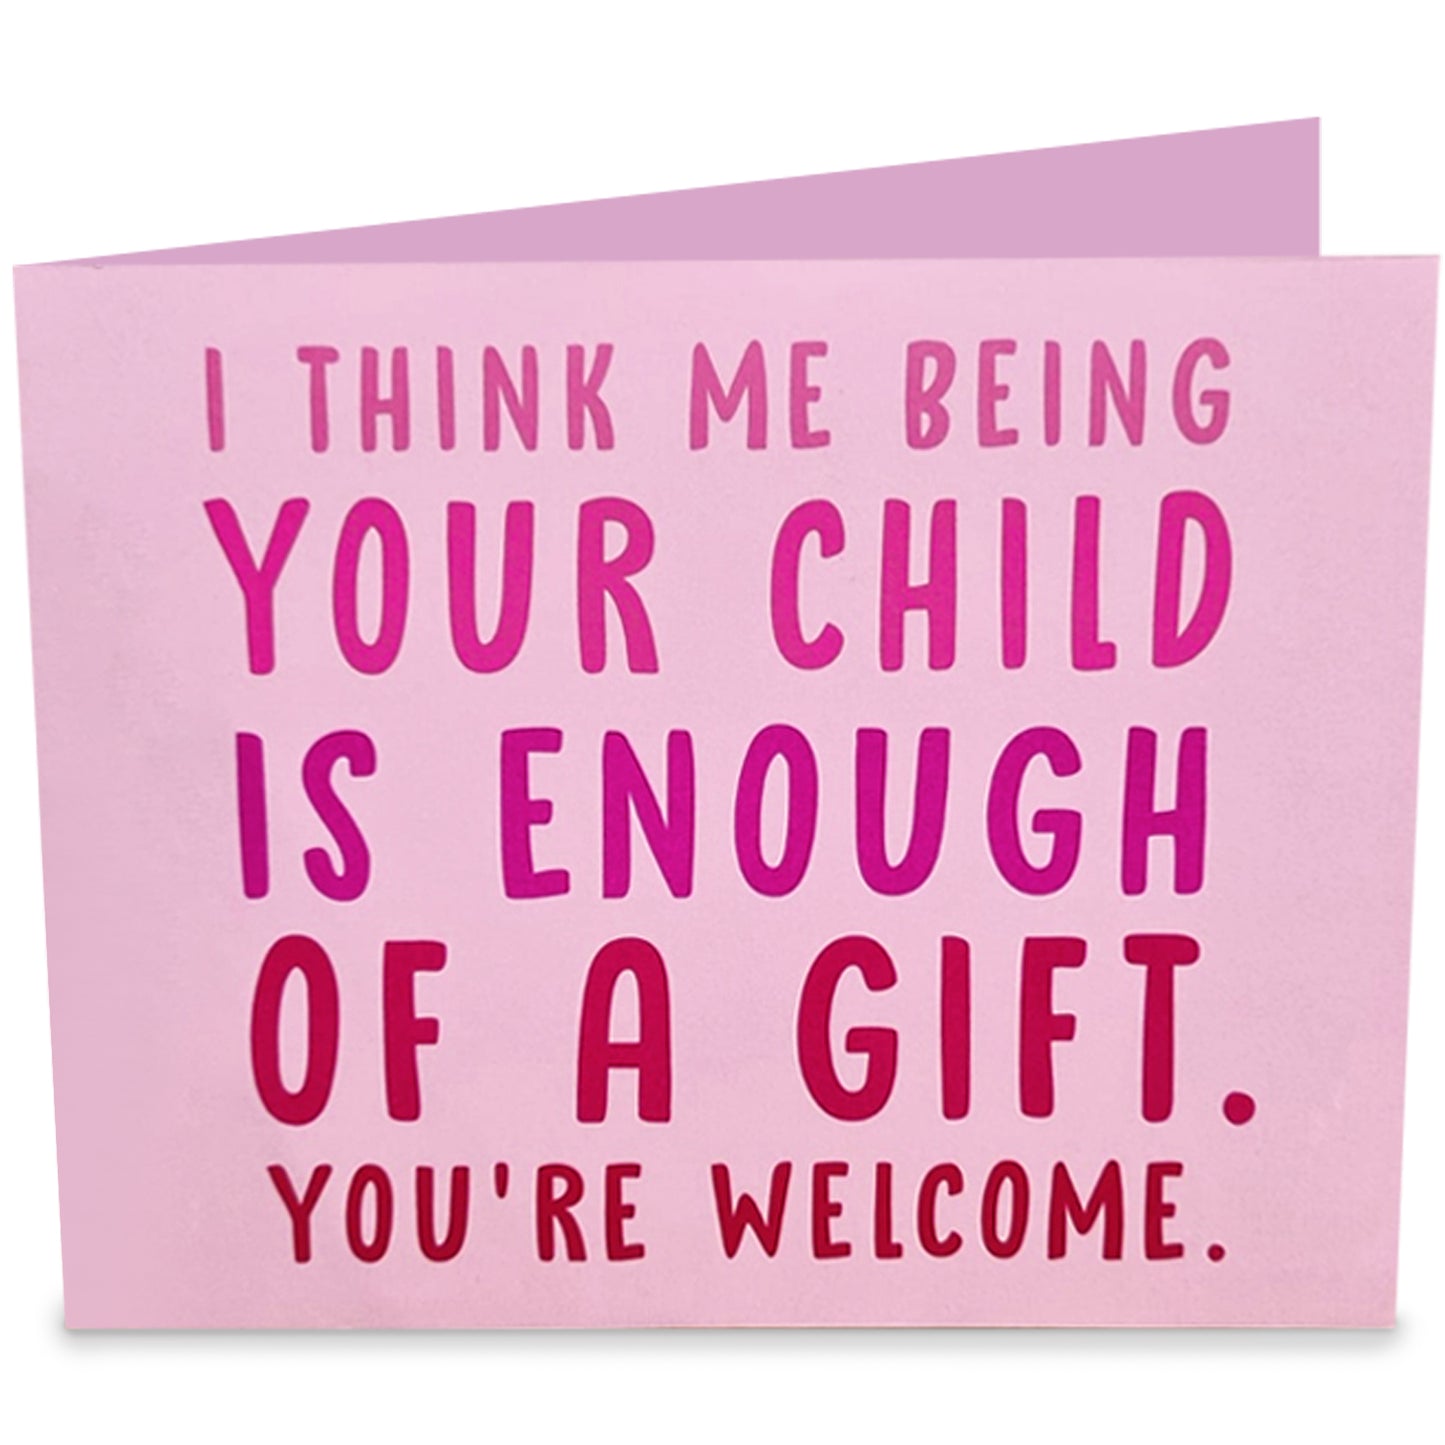 Funny Pop Up Card - Me Being Your Daughter - For Mom Dad Men Women